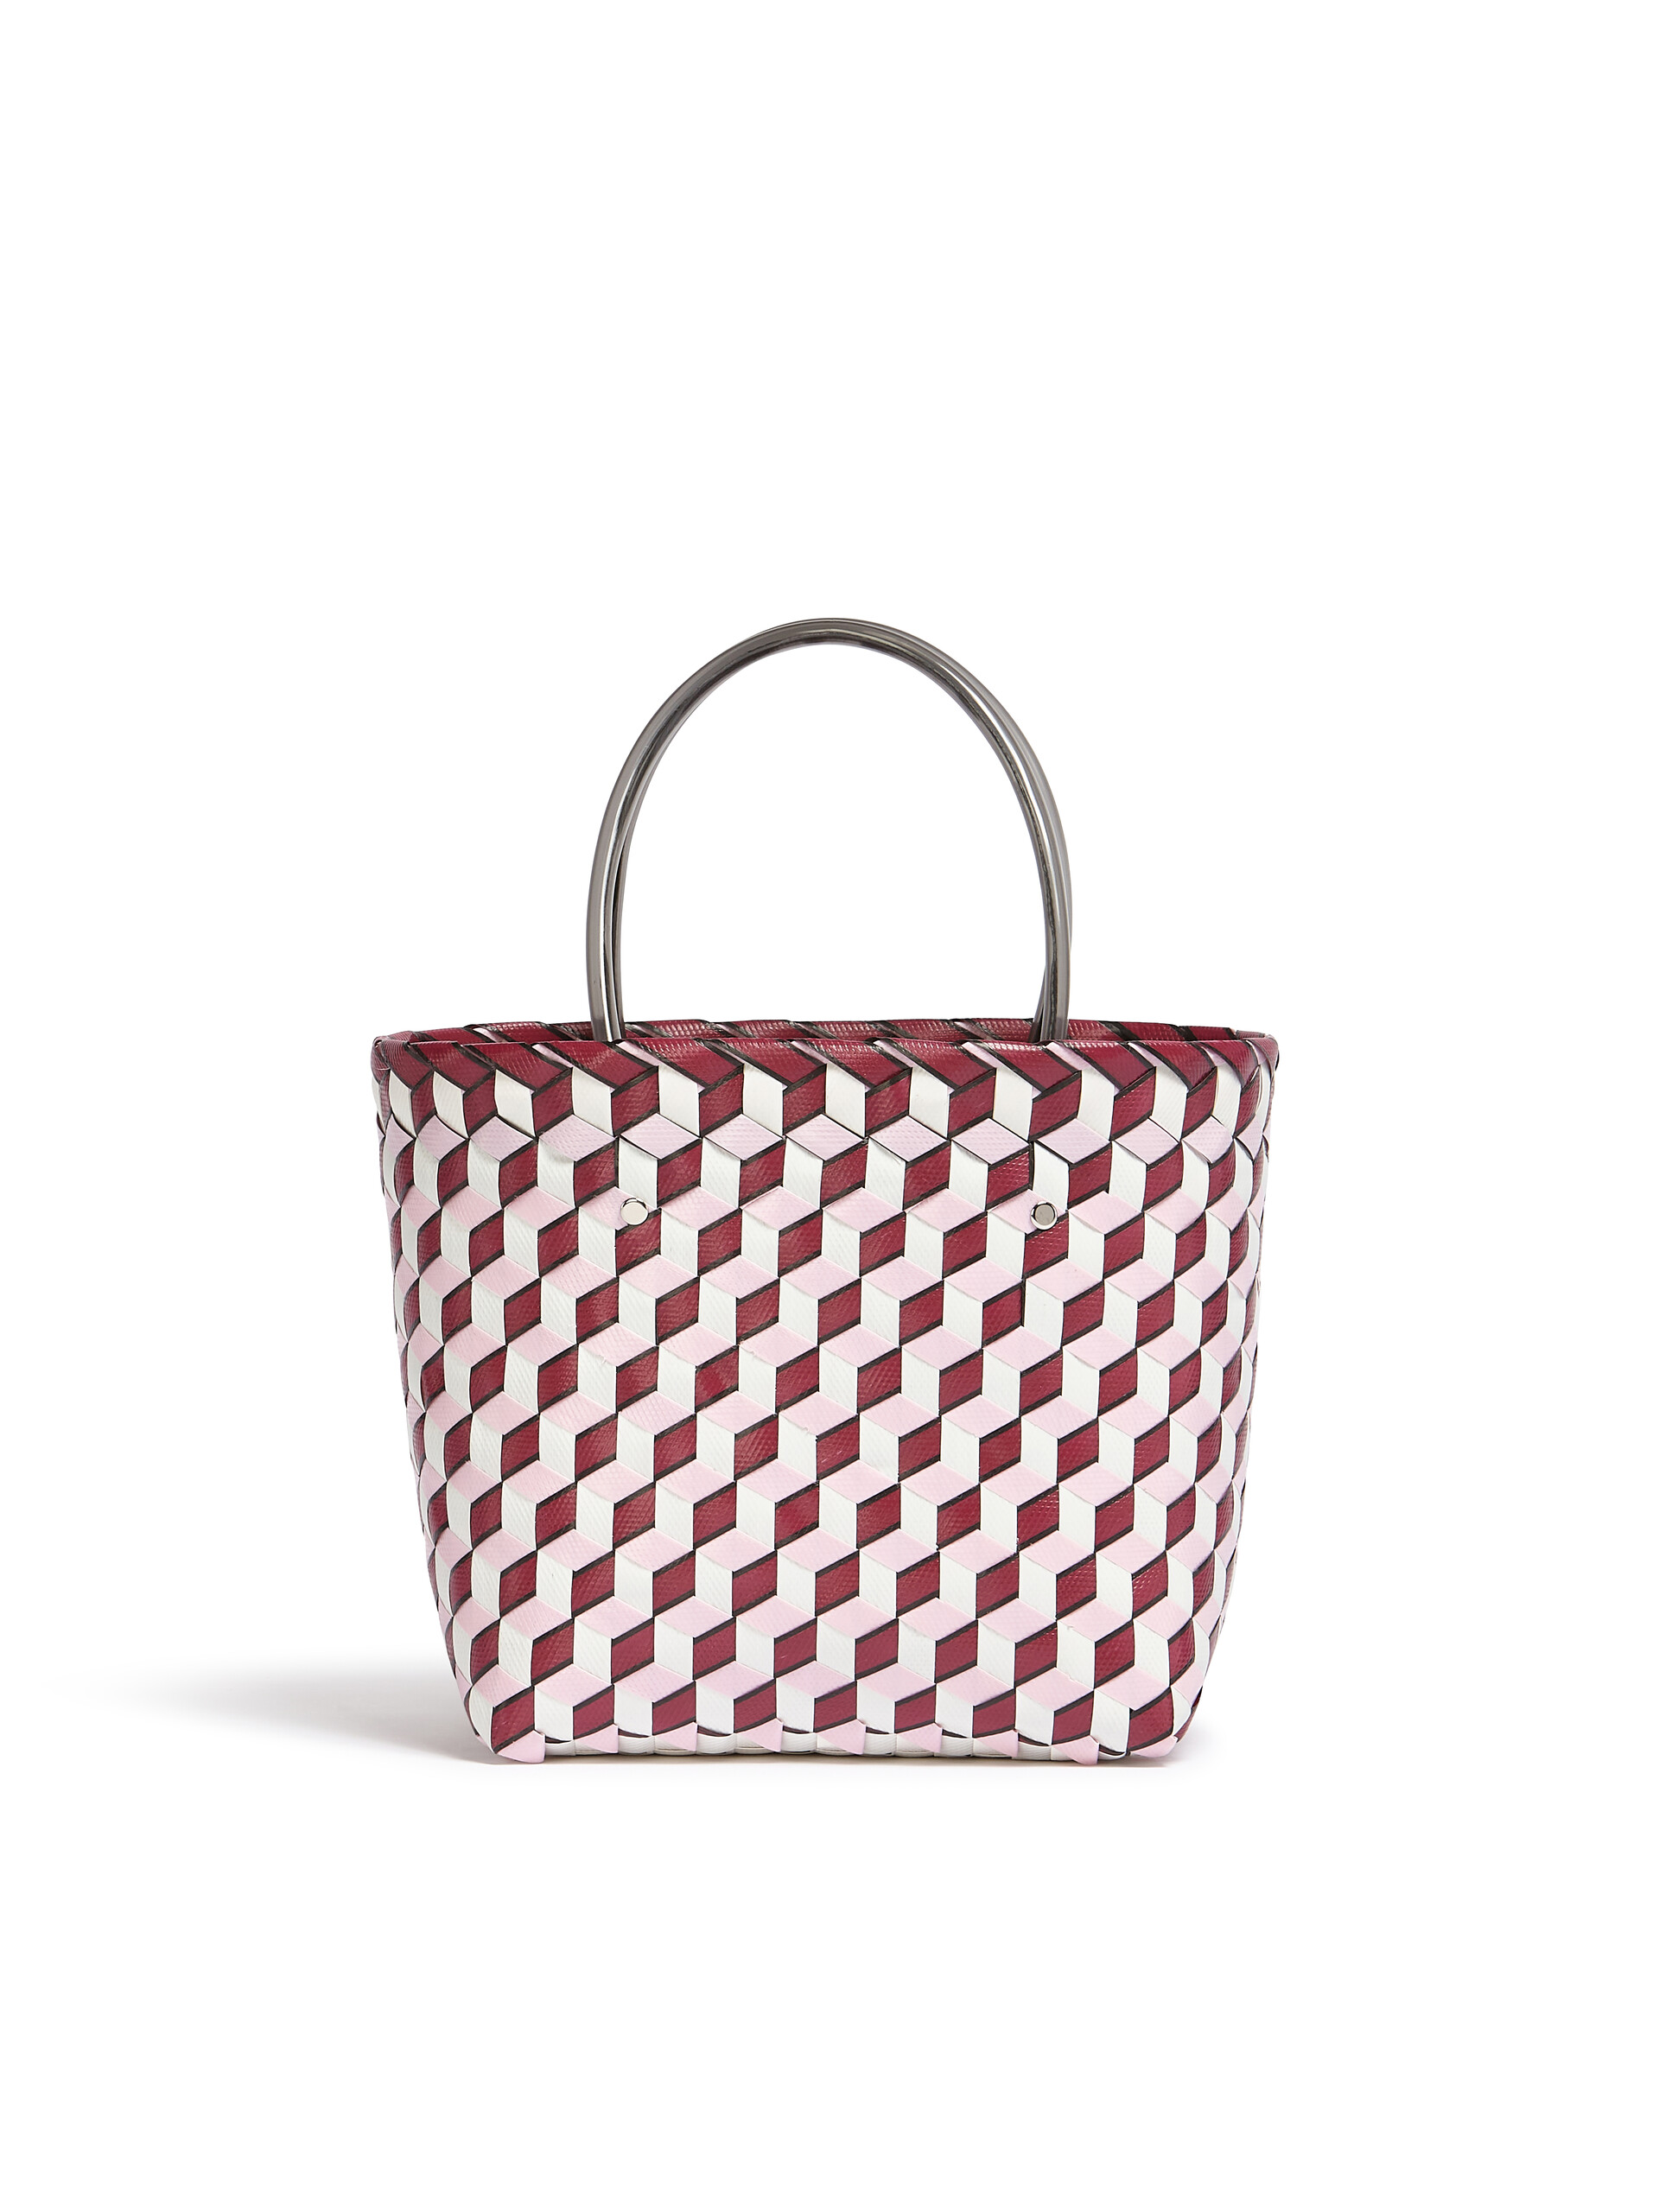 MARNI MARKET 3D BAG in burgundy cube woven material - Shopping Bags - Image 3